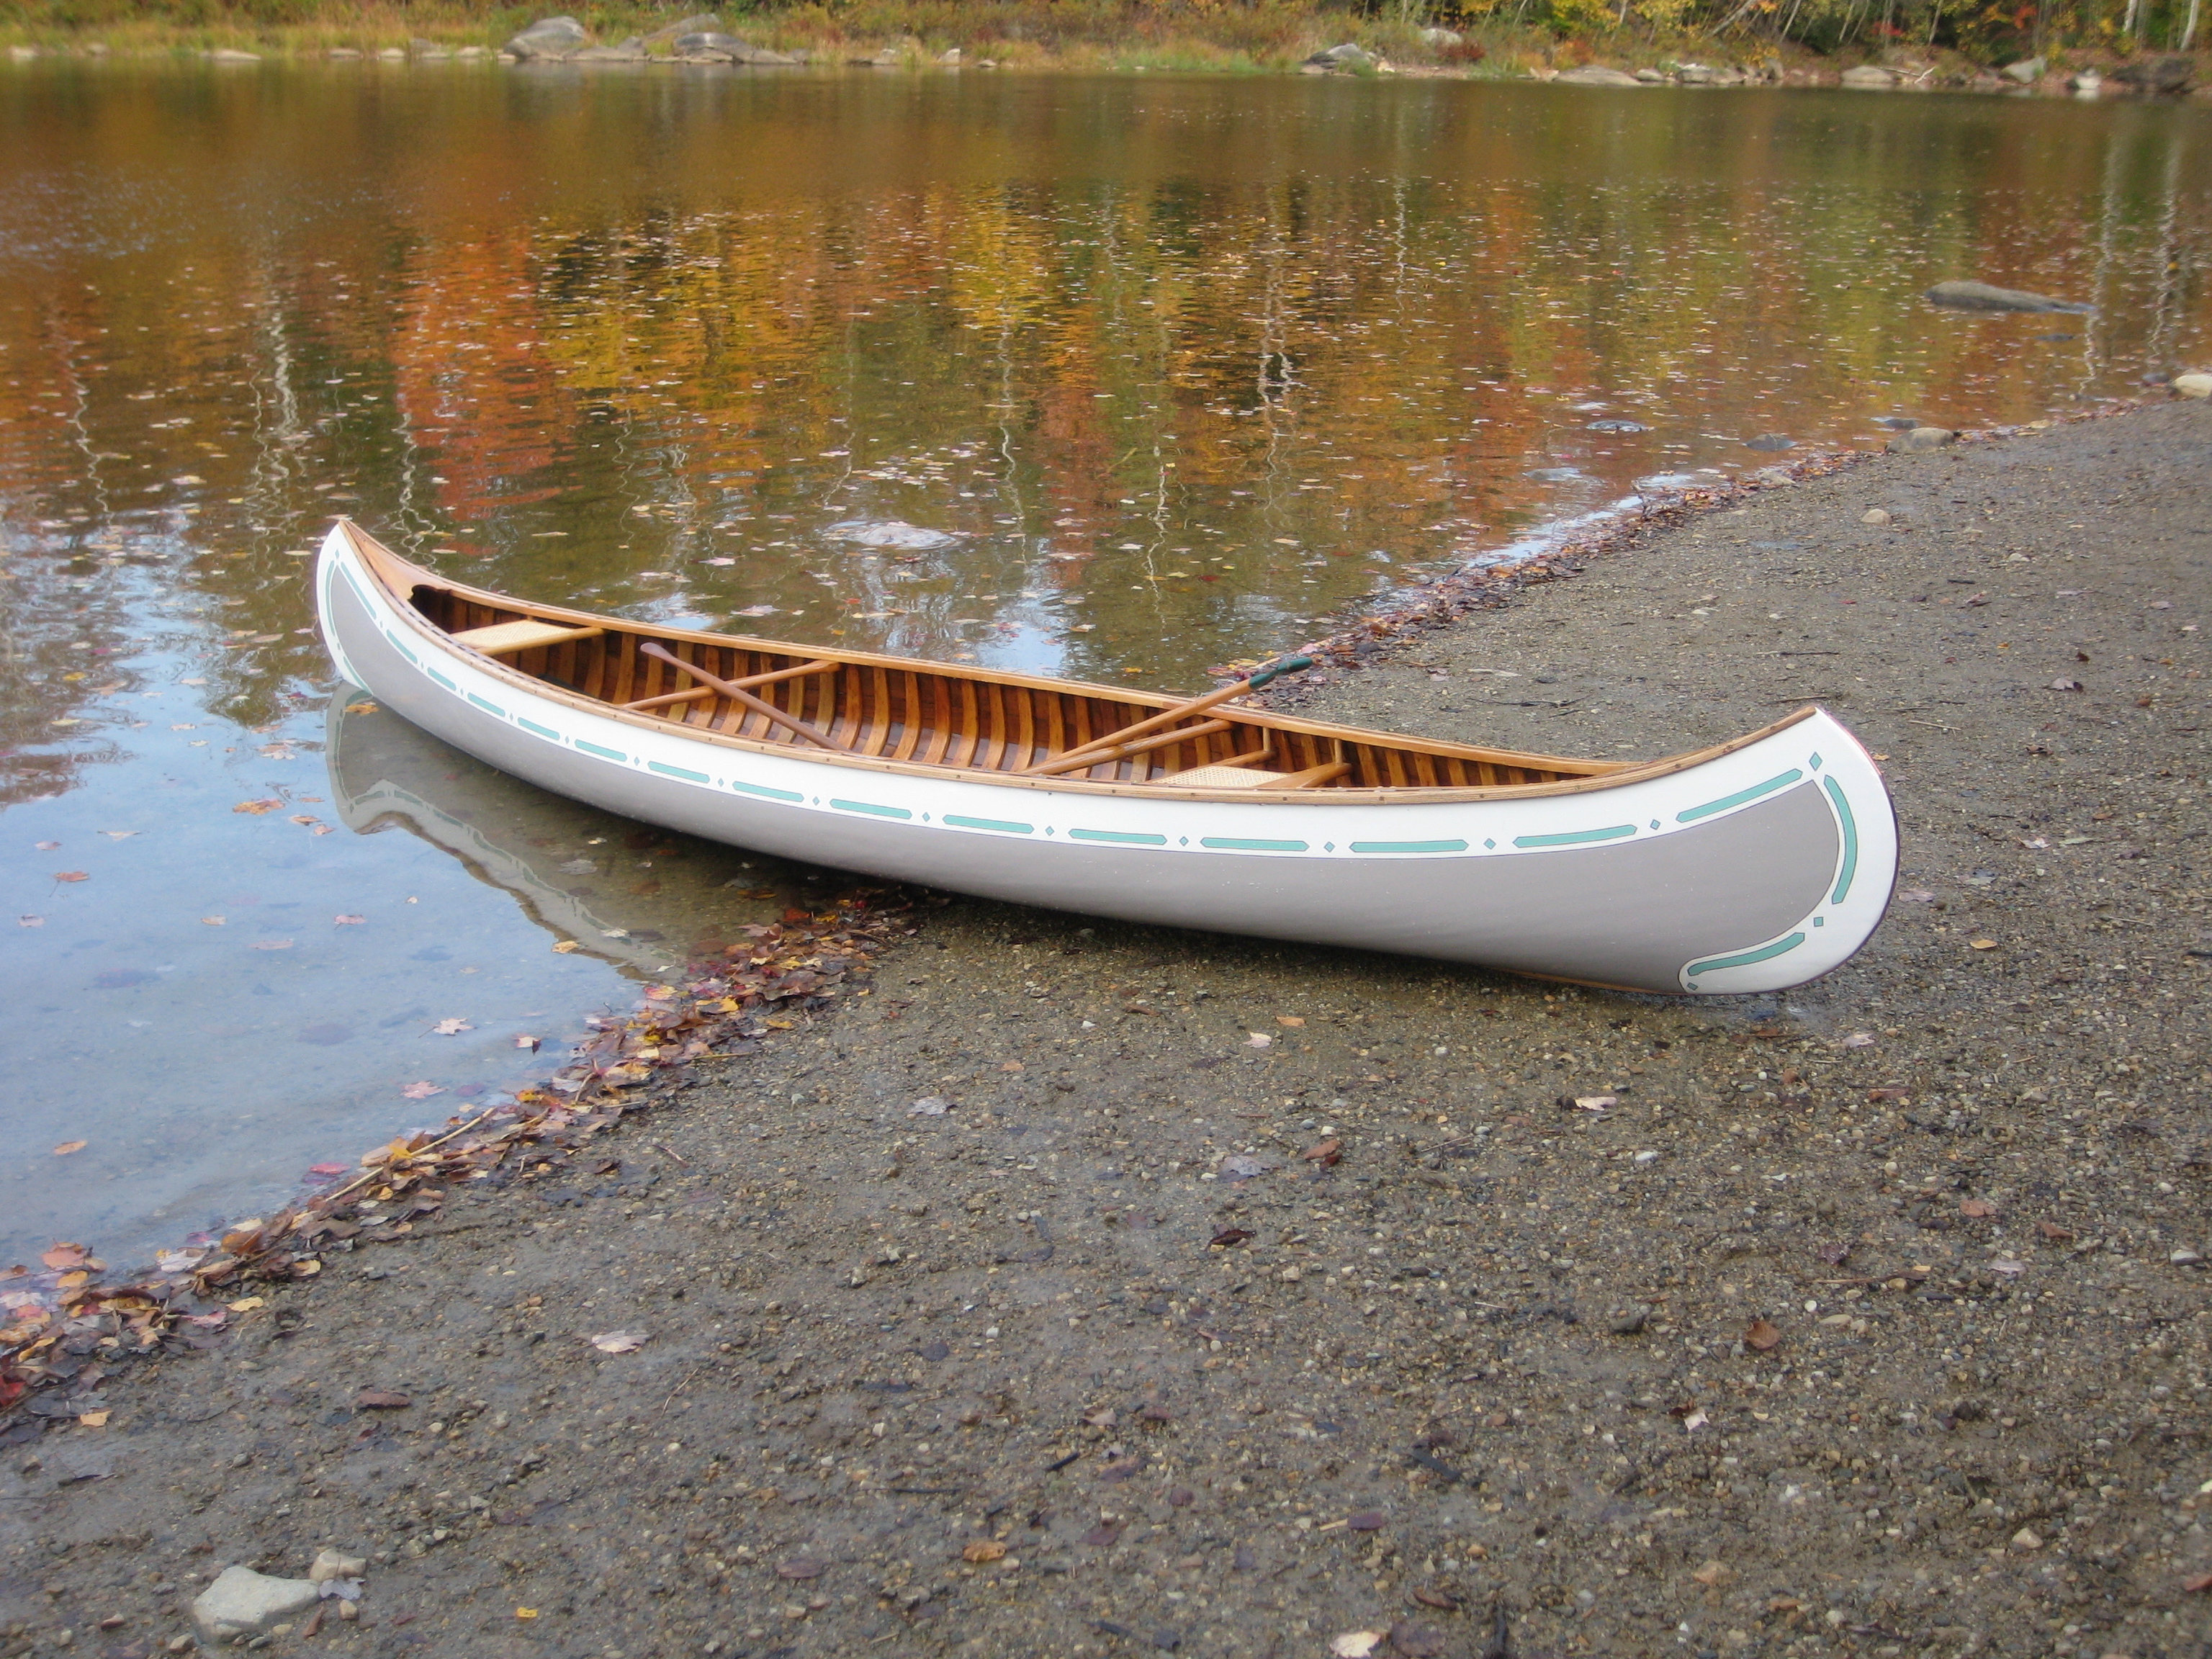 Gallery of Vintage Wooden Canoe and Boat Restorations by Ralph Nimtz